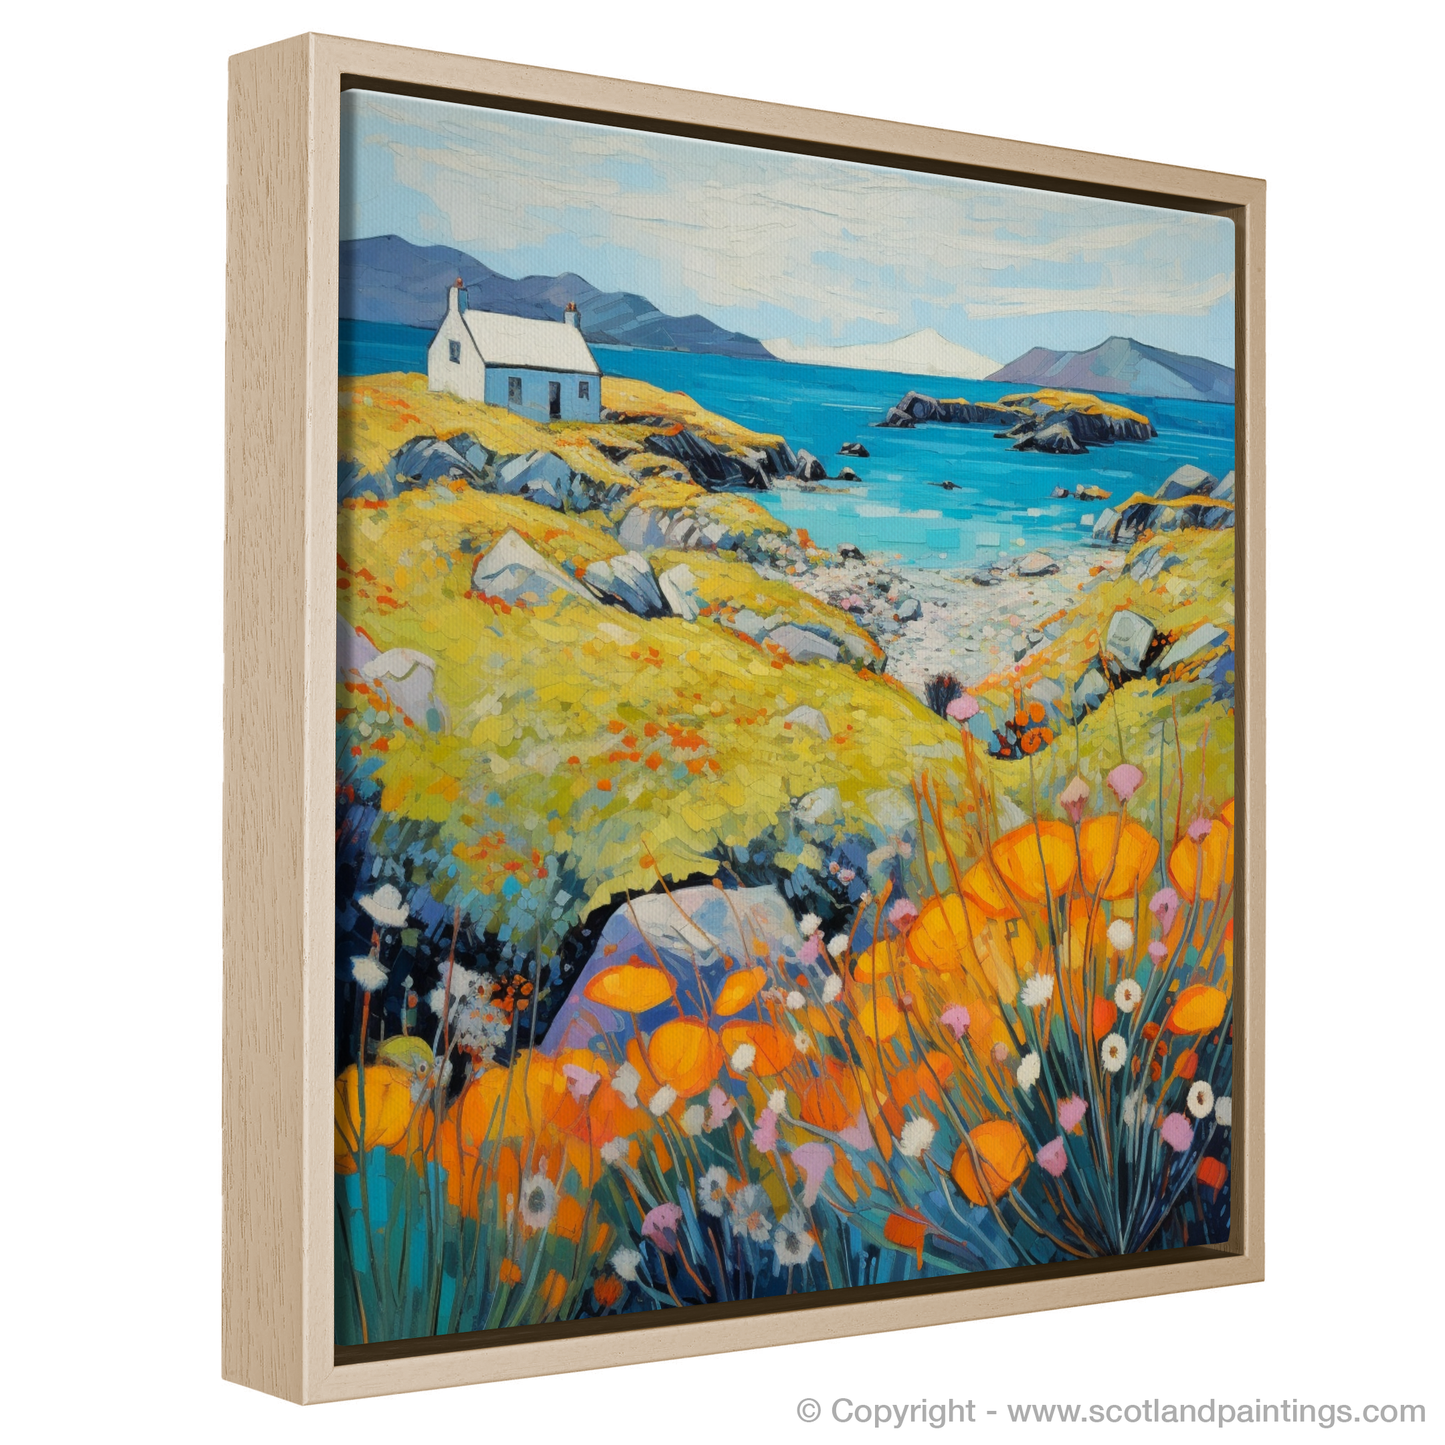 Painting and Art Print of Isle of Scalpay, Outer Hebrides in summer entitled "Summer Vibrance on Isle of Scalpay".